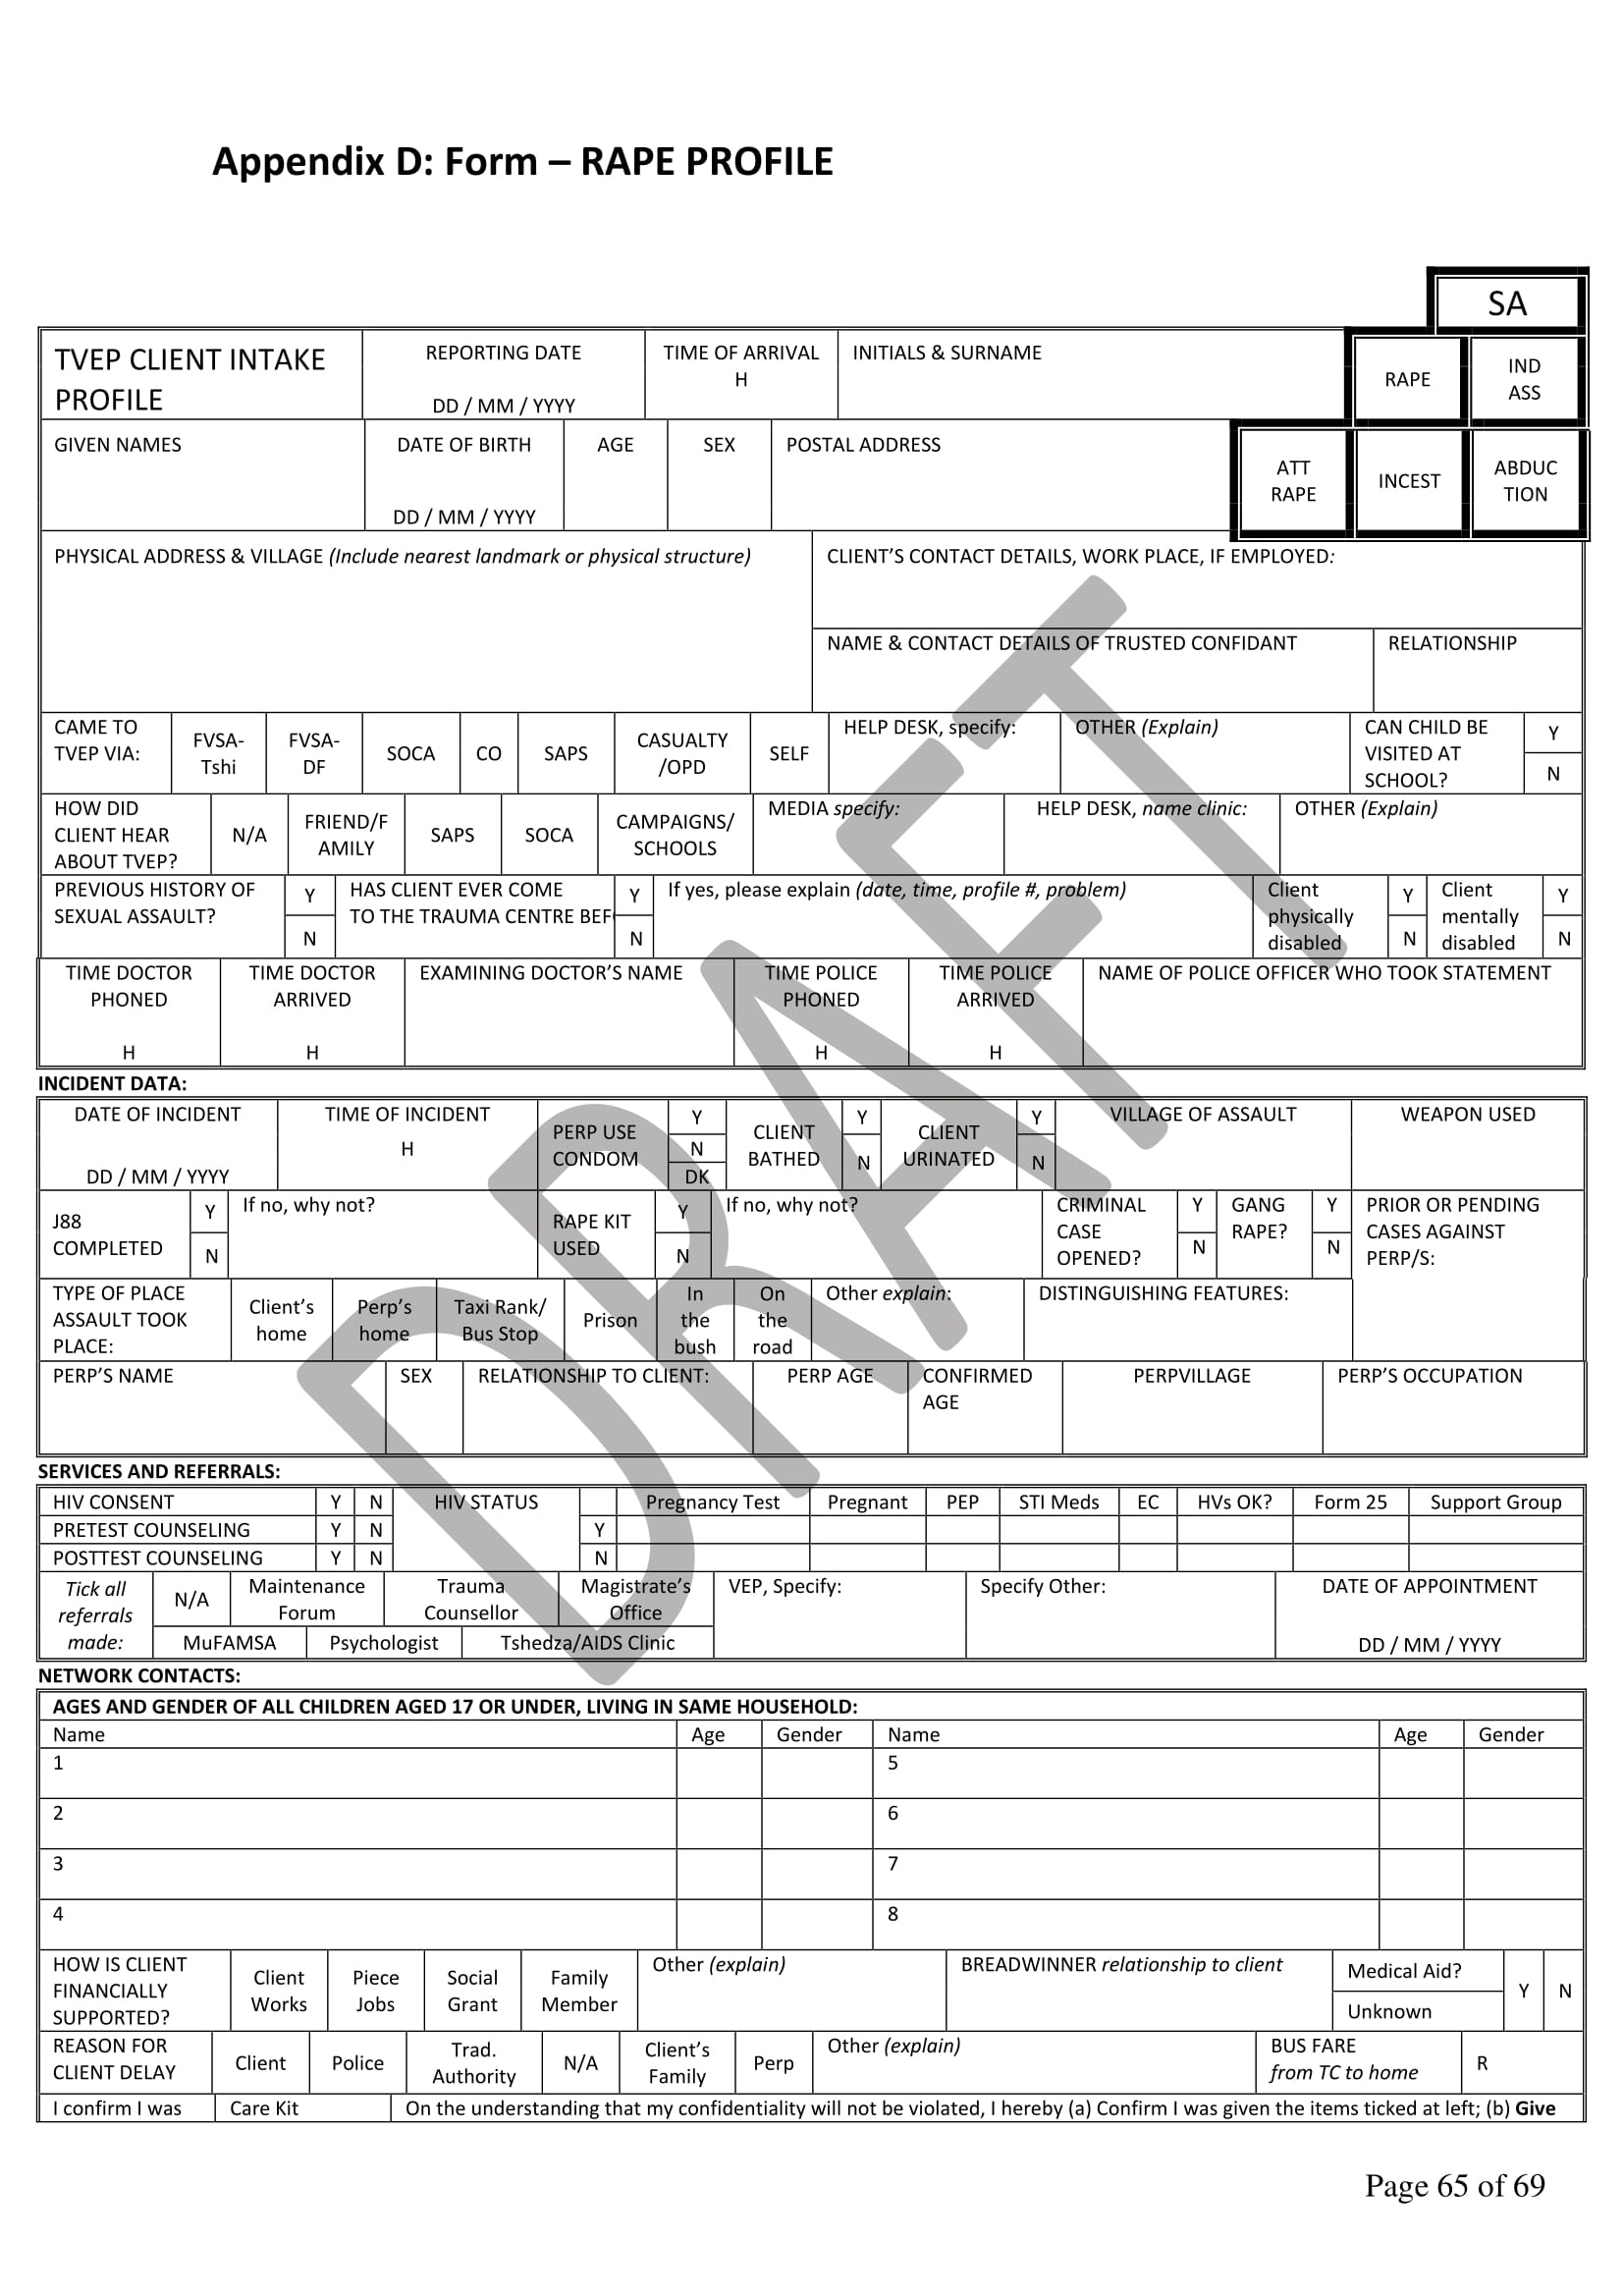 sexual abuse client intake form 1